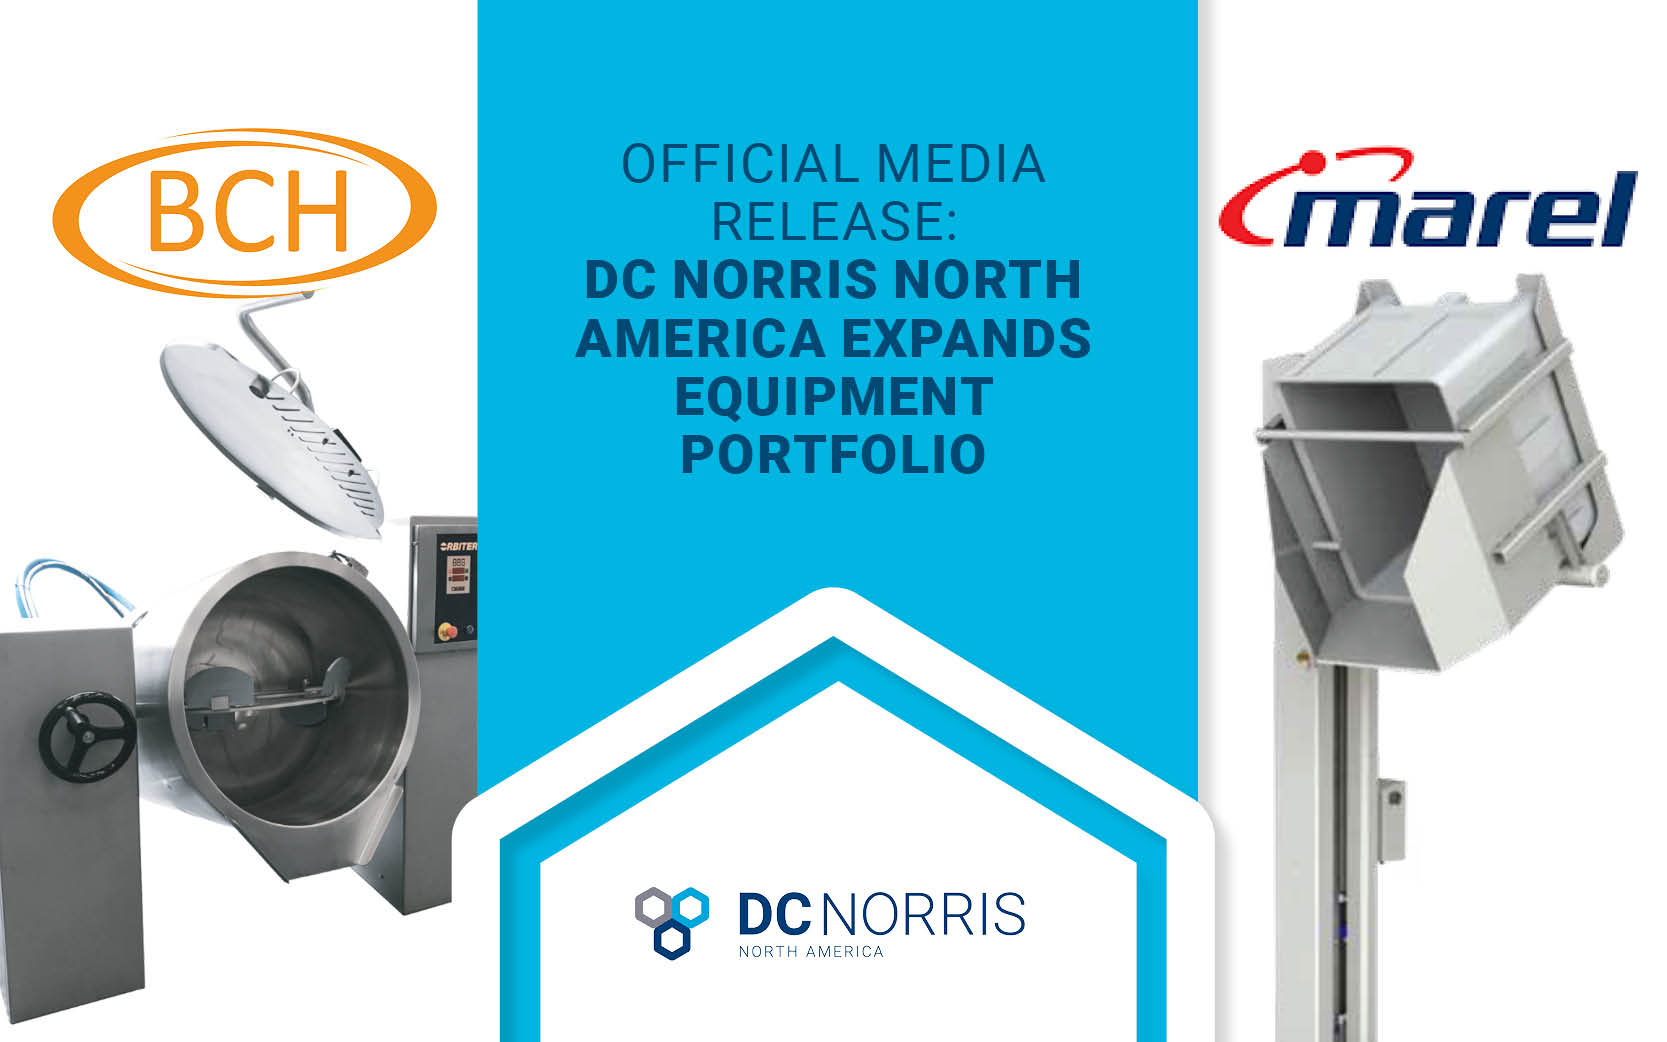 the BCH Orbiter kettle and a Marel lift are in the background below the BCH and Marel logos. The headline on the image reads: Official Media Release: DC Norris North America expands equipment portfolio